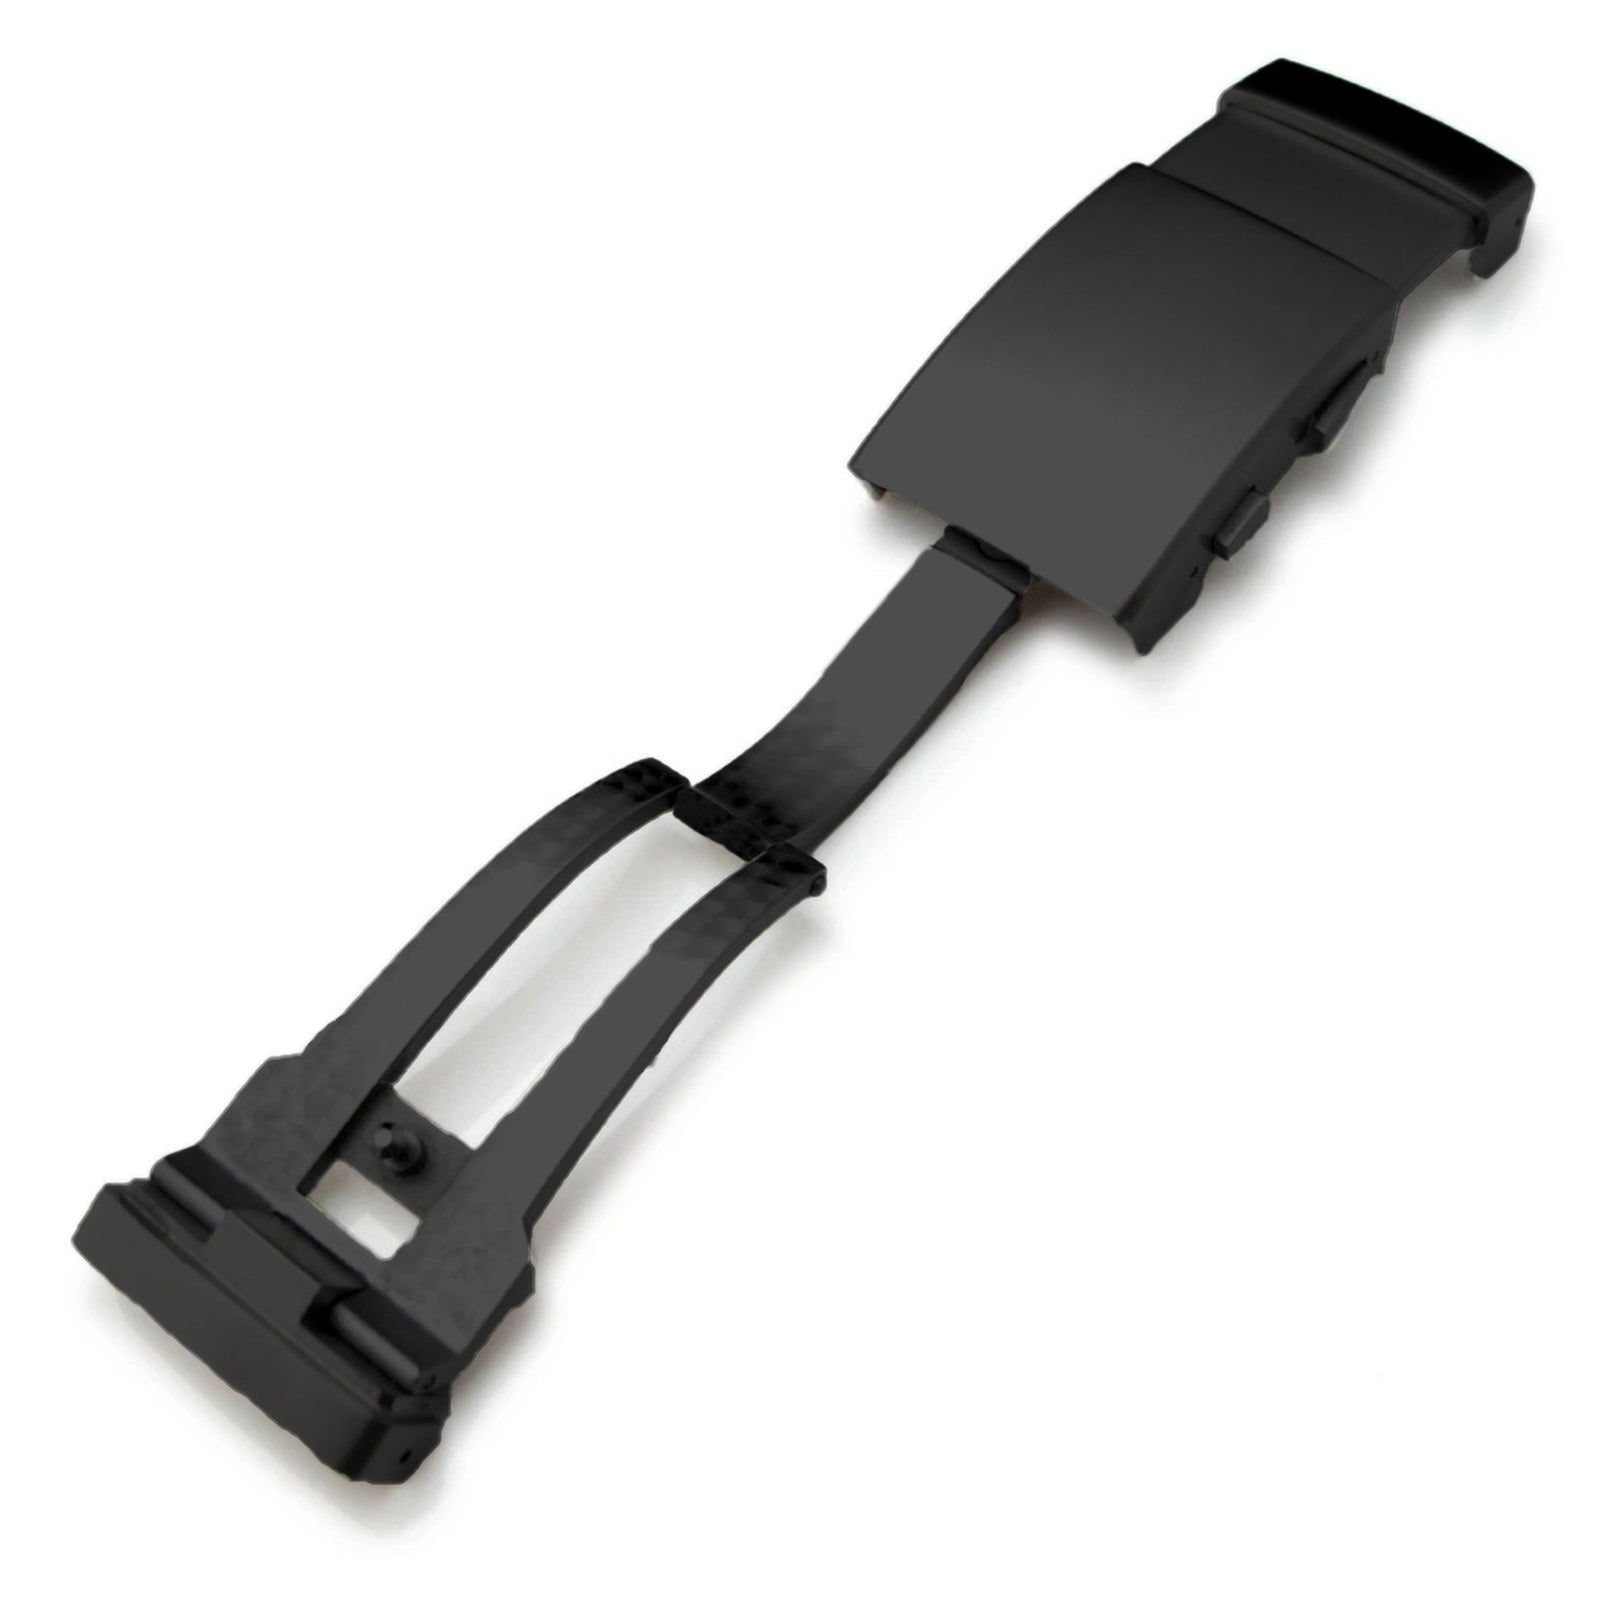 Strapcode MiLTAT Ratchet Buckle Clasp is an ideall Wetsuit watch band  buckle.